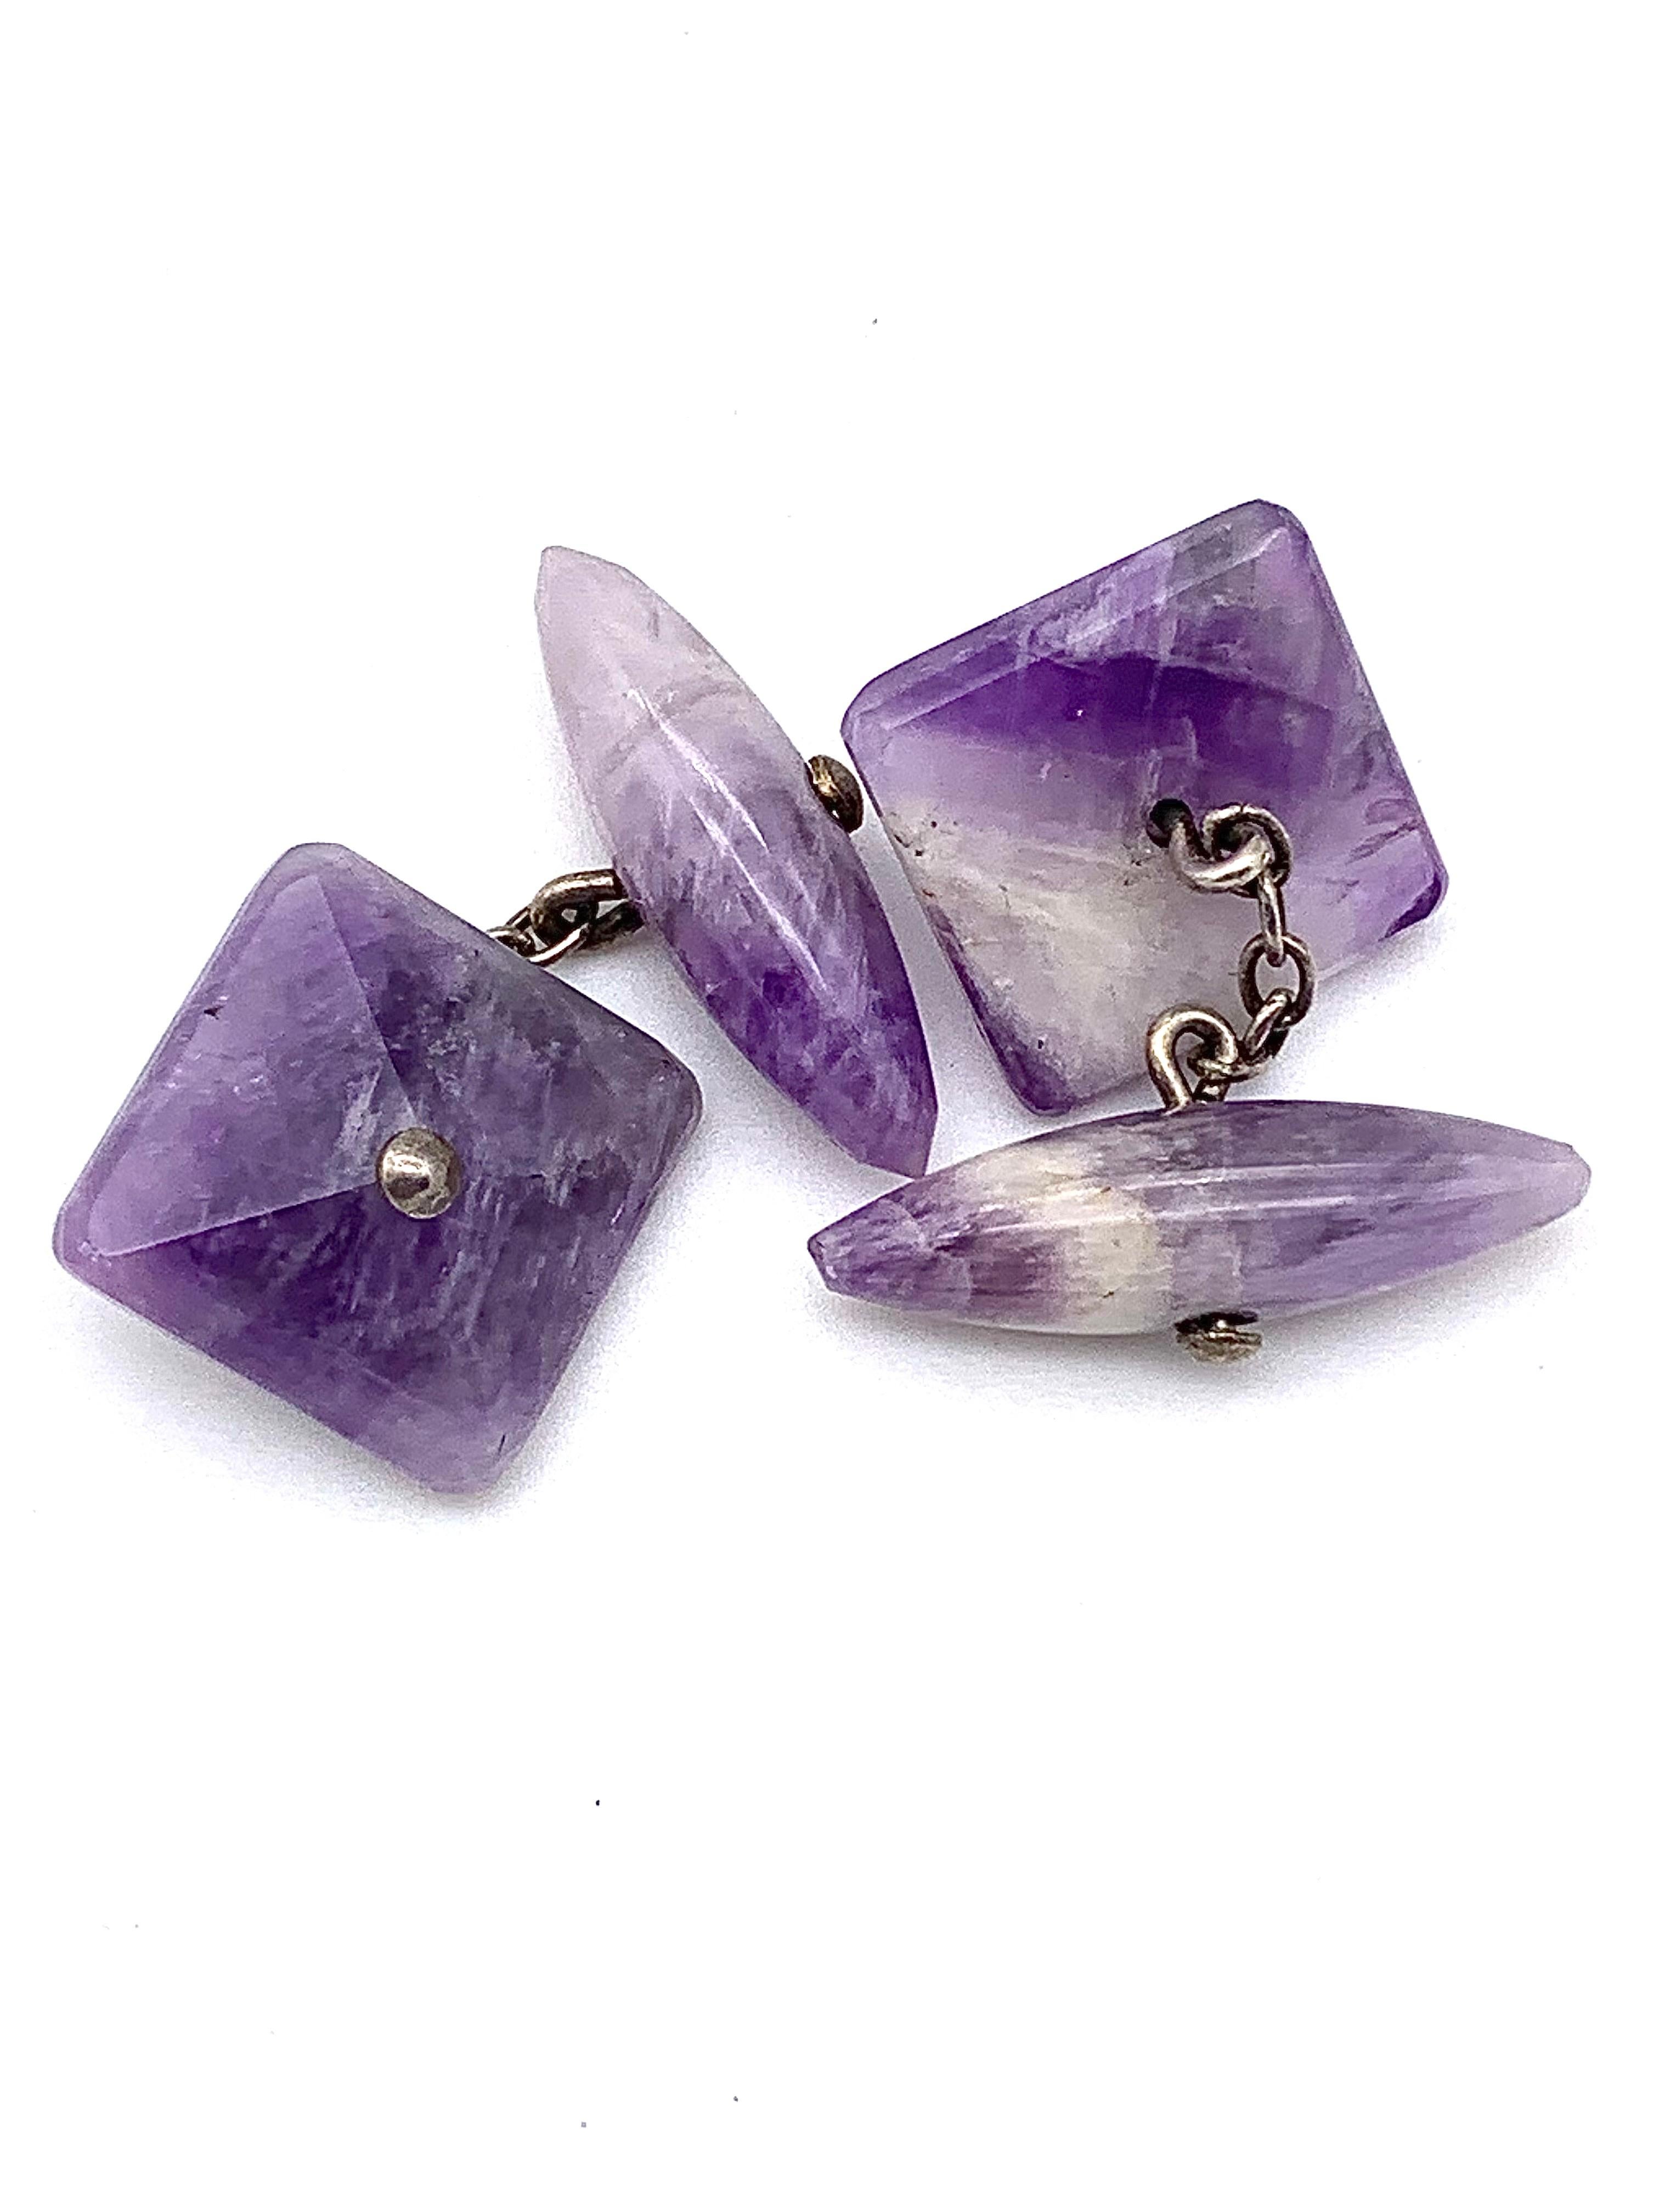 These elegant cufflinks were handcrafted around 1900.
On one side the cufflinks feature banded fluorite cut in the shape of pyramids, the complementary elements are cut in bullet shape. The two elements have been drilledand fitted with silver rivets